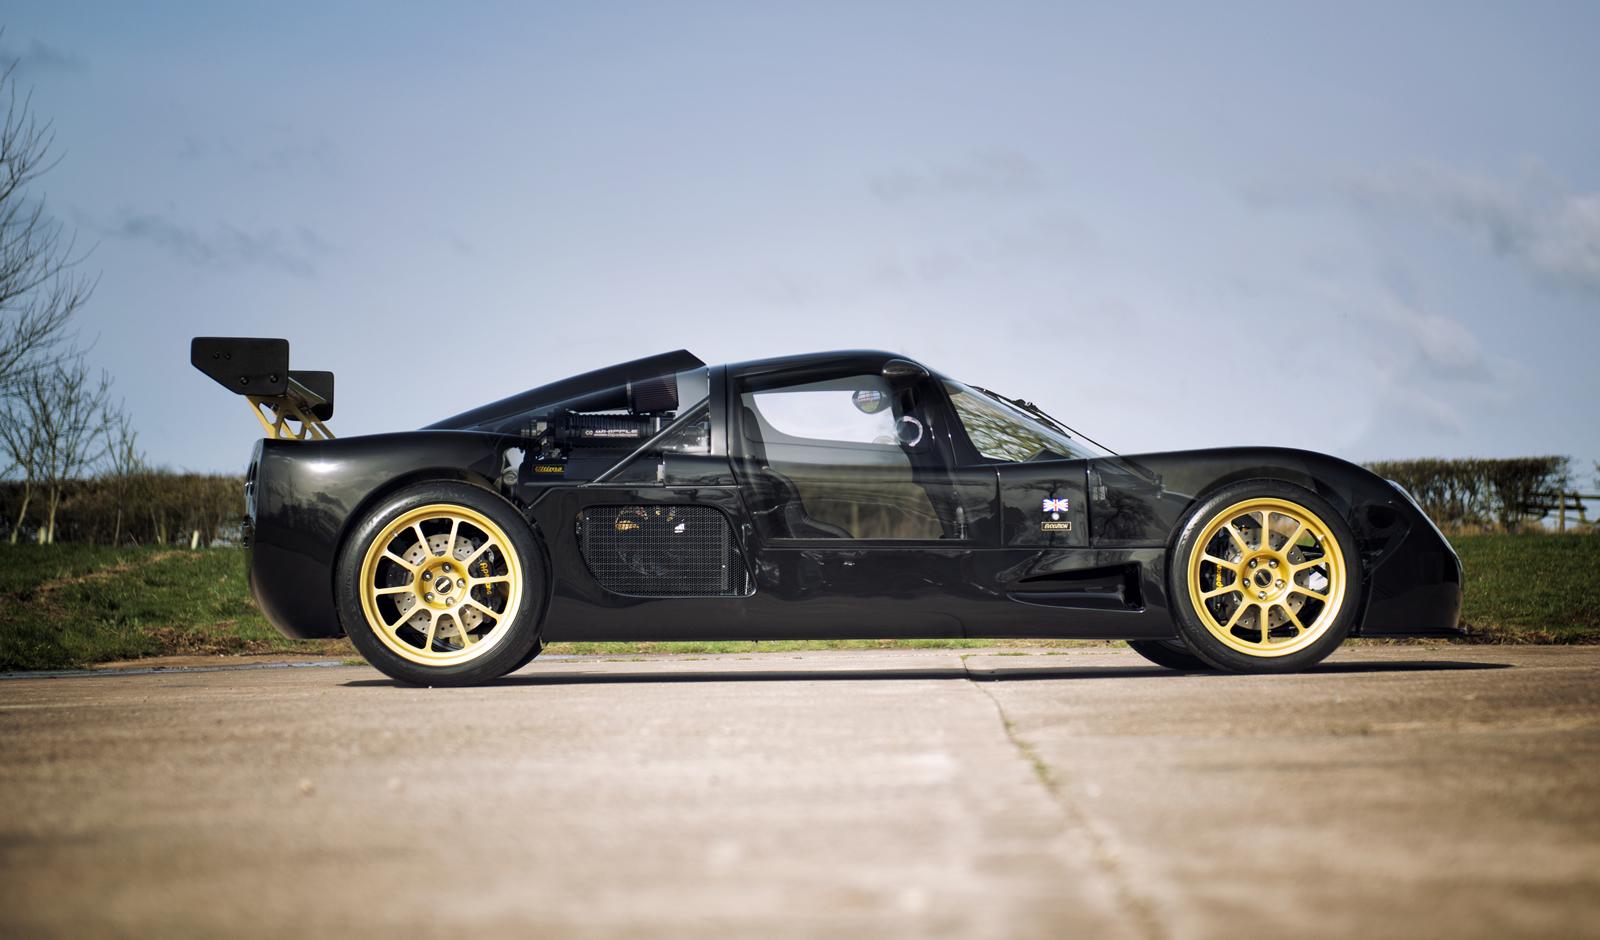 ultima-evolution-makes-video-debut-with-all-its-1020-horsepower-video-photo-gallery_10